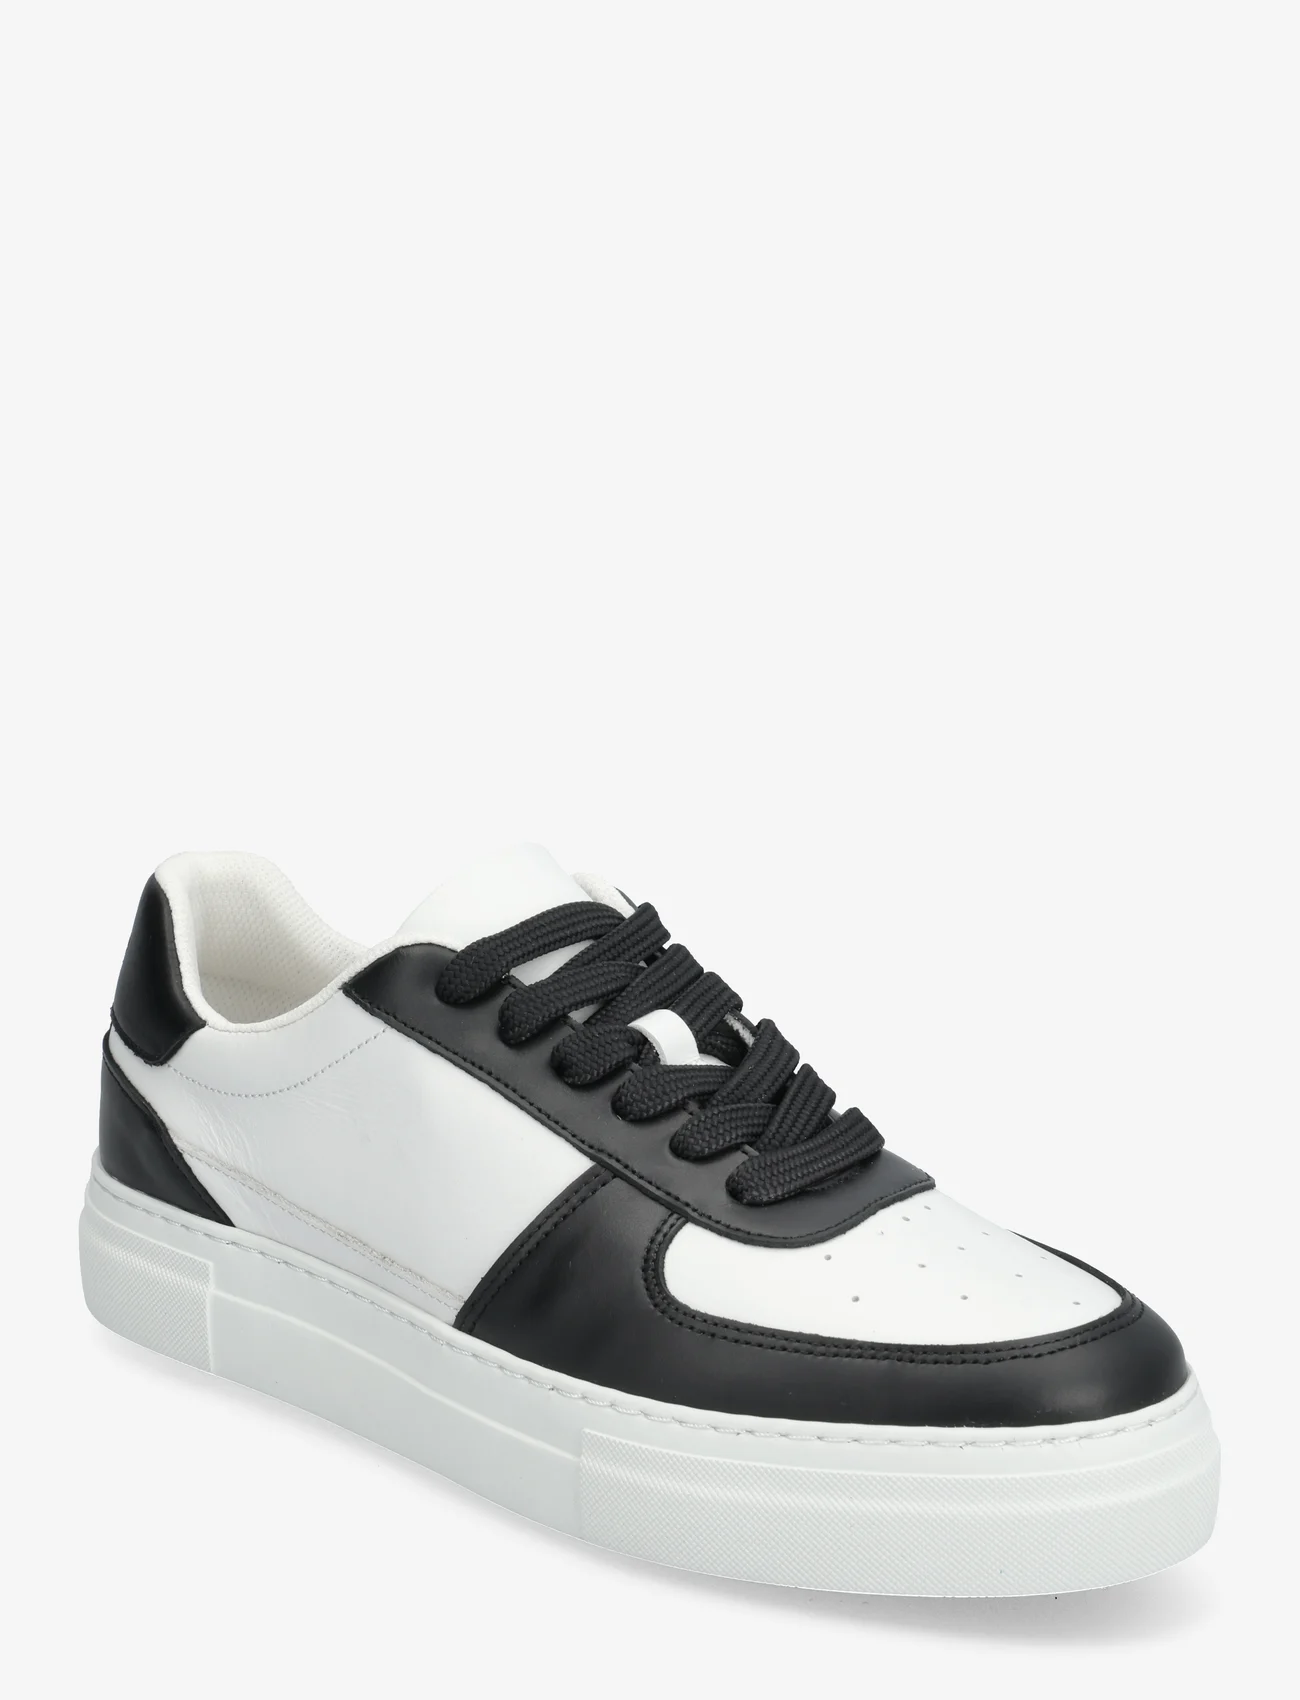 Selected Homme - SLHHARALD LEATHER SNEAKER - lave sneakers - black - 0